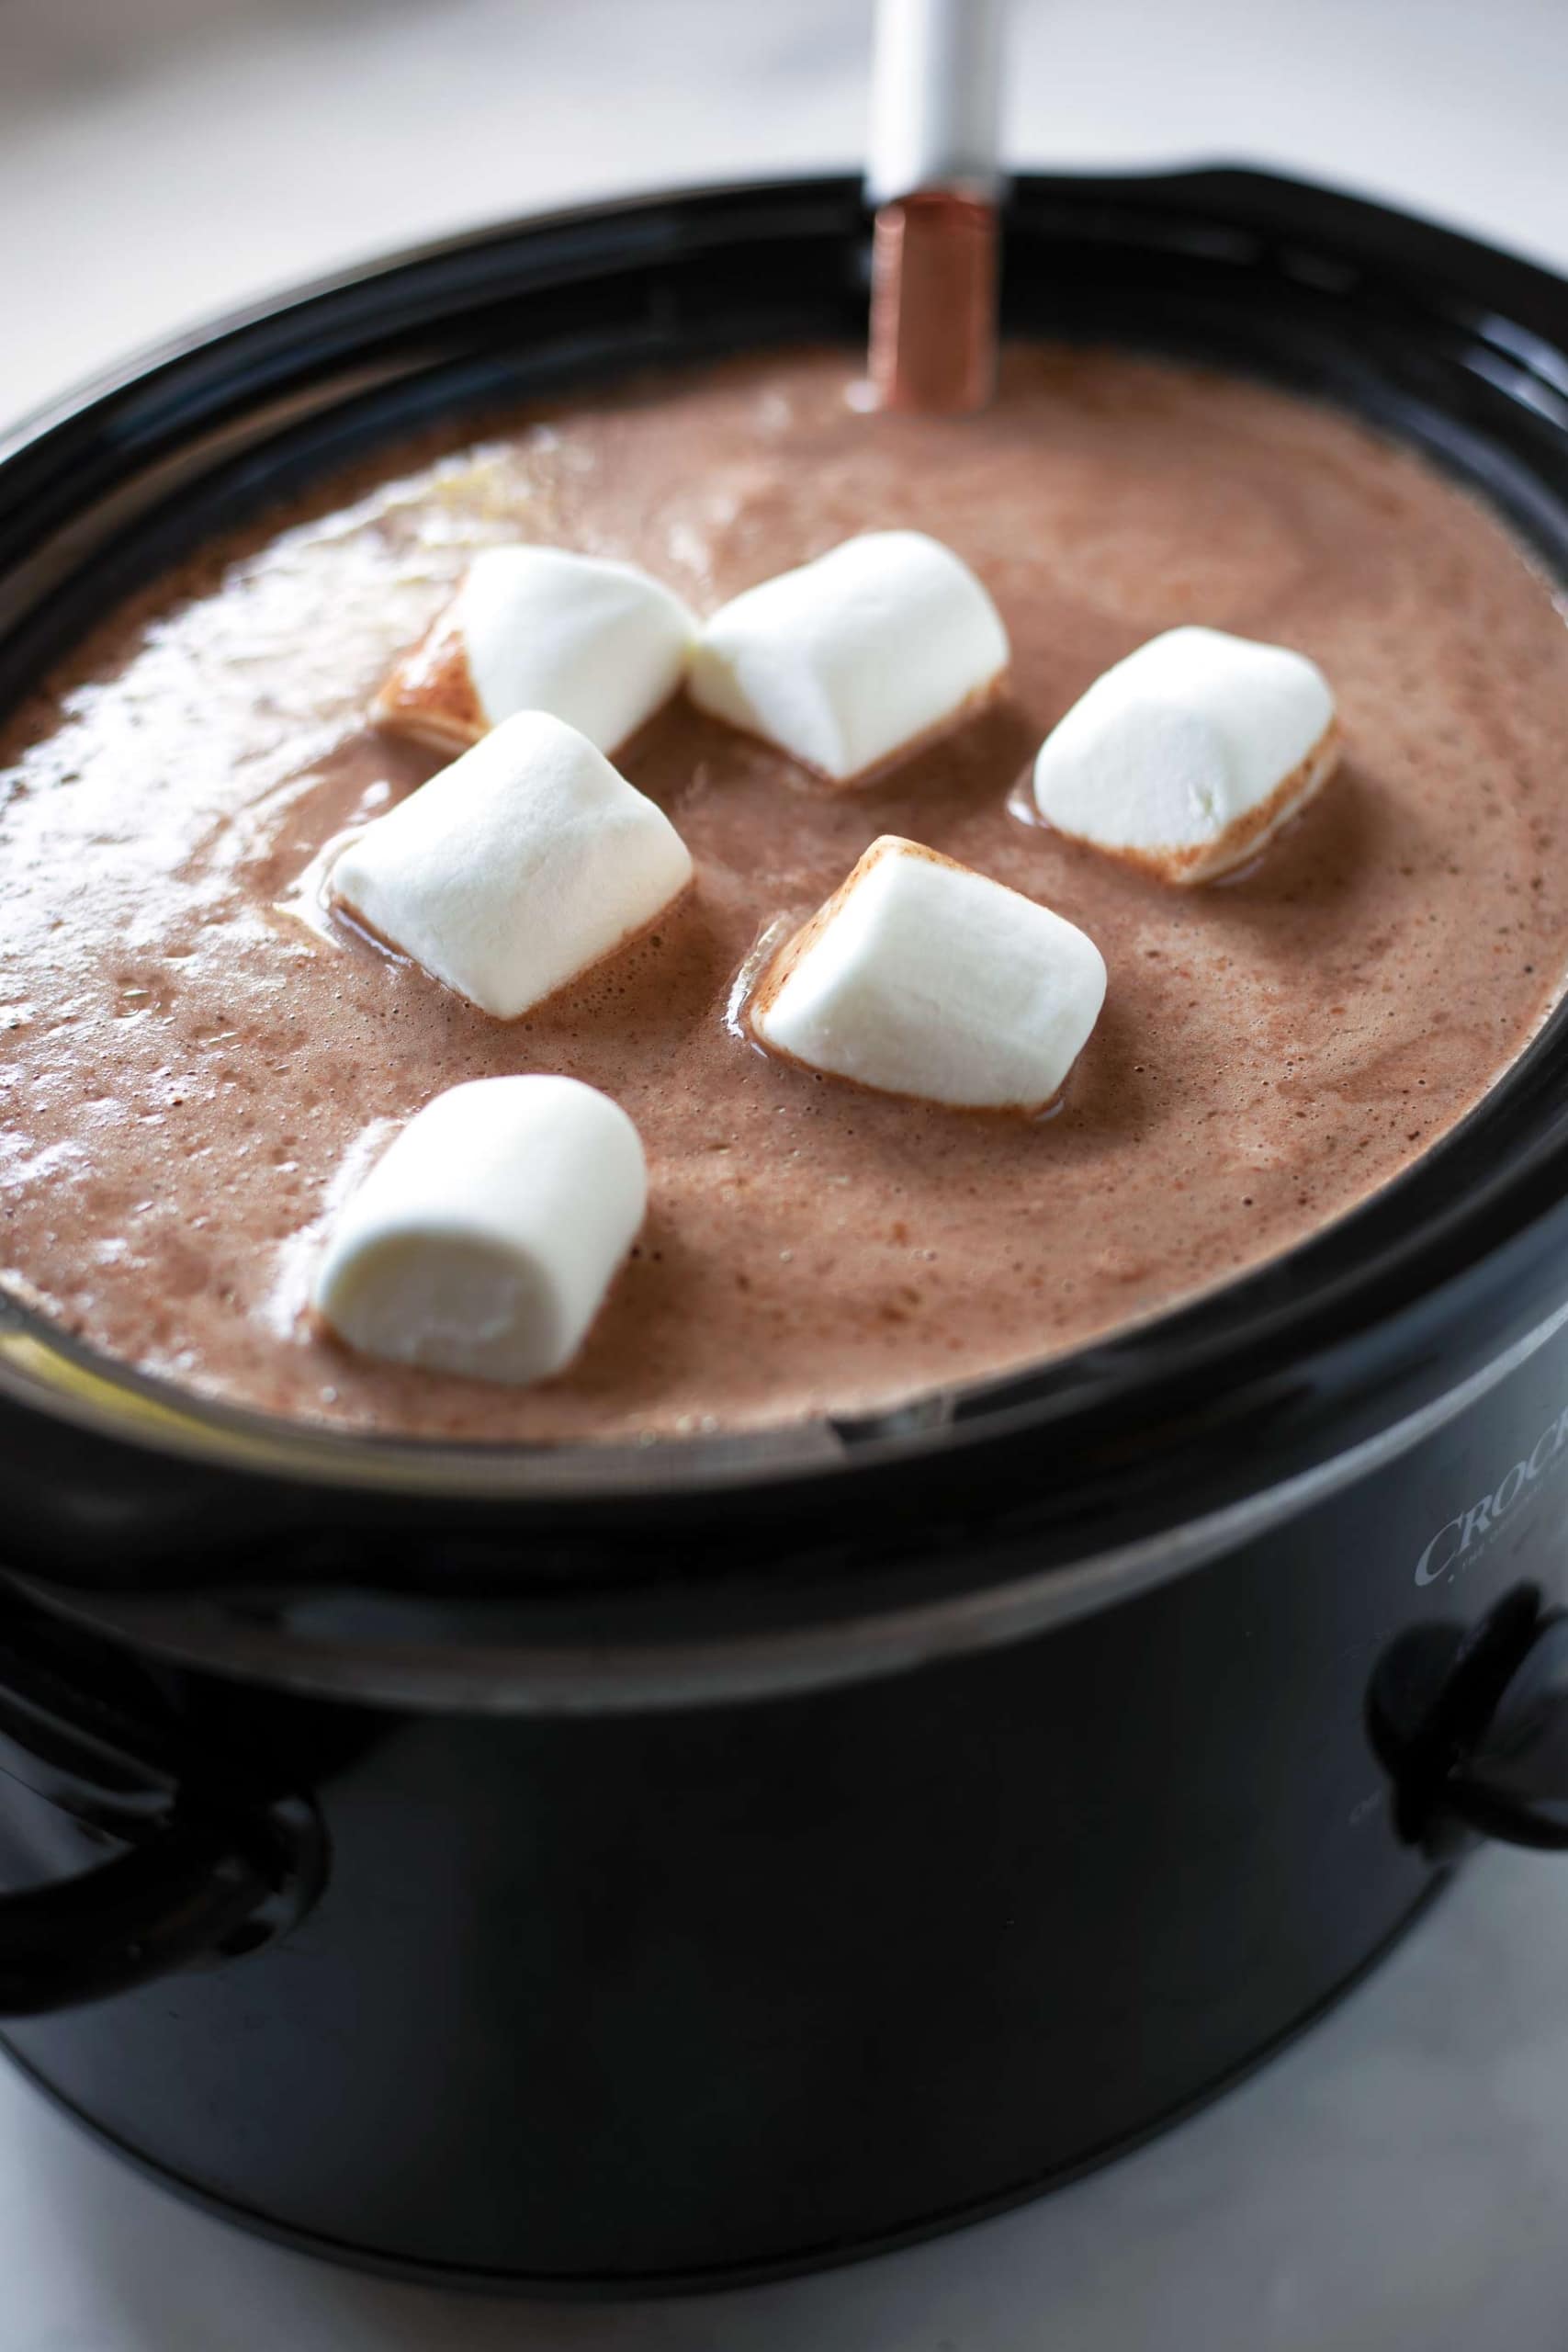 Hot chocolate without a stove - CNET